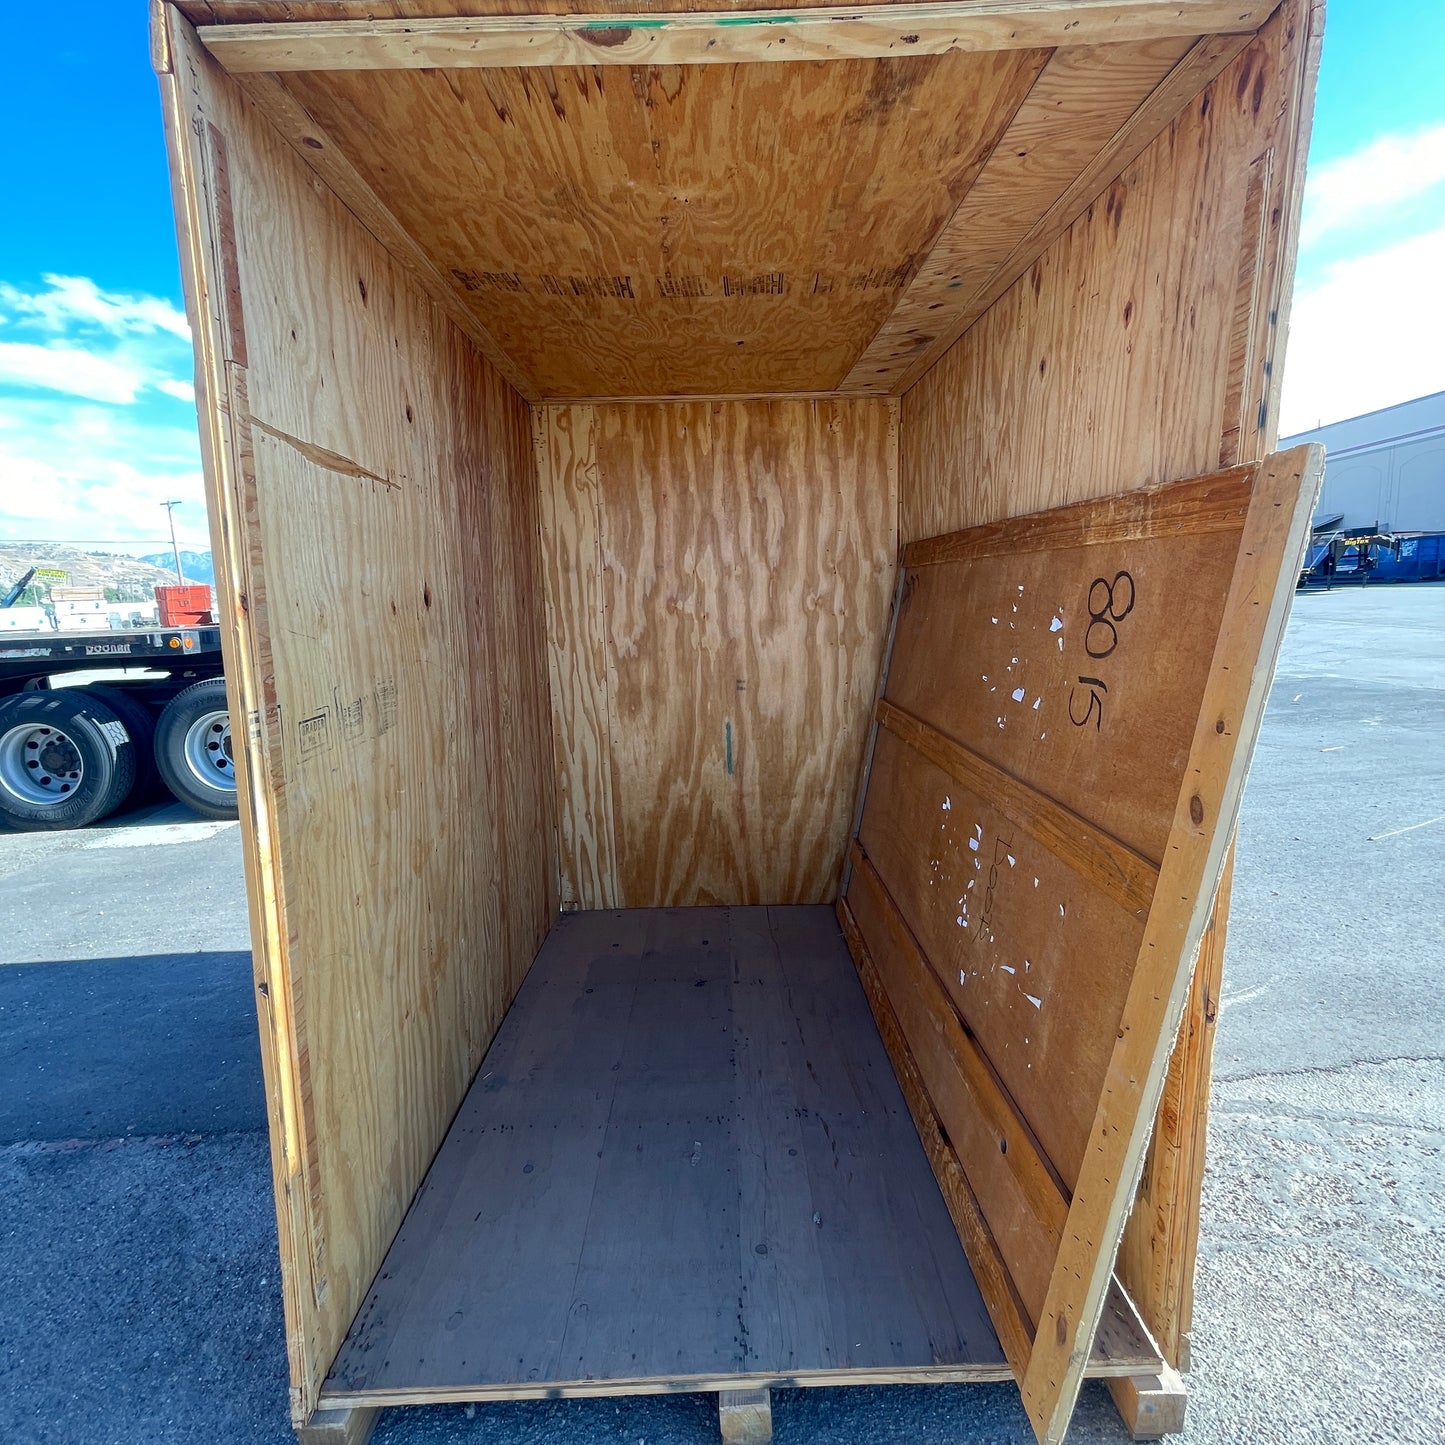 Z@ LARGE PLYWOOD STORAGE CONTAINER / CRATE ~5' W x 7' L x 7.5' T (Good Condition, AS-IS)